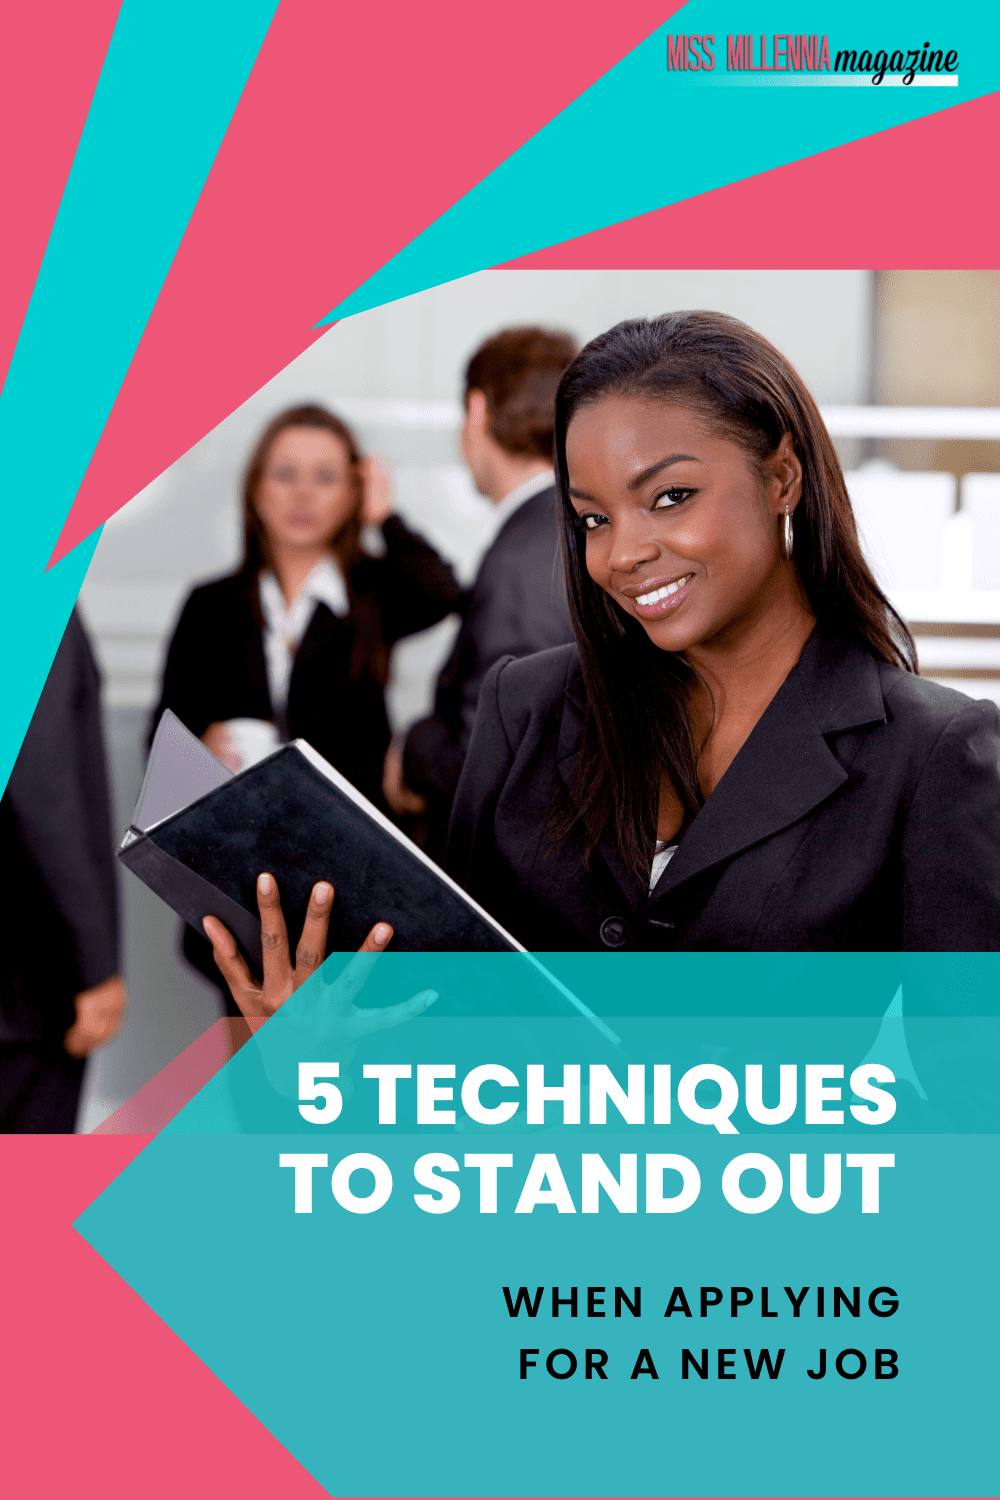 5 Techniques to Stand Out When Applying for a New Job